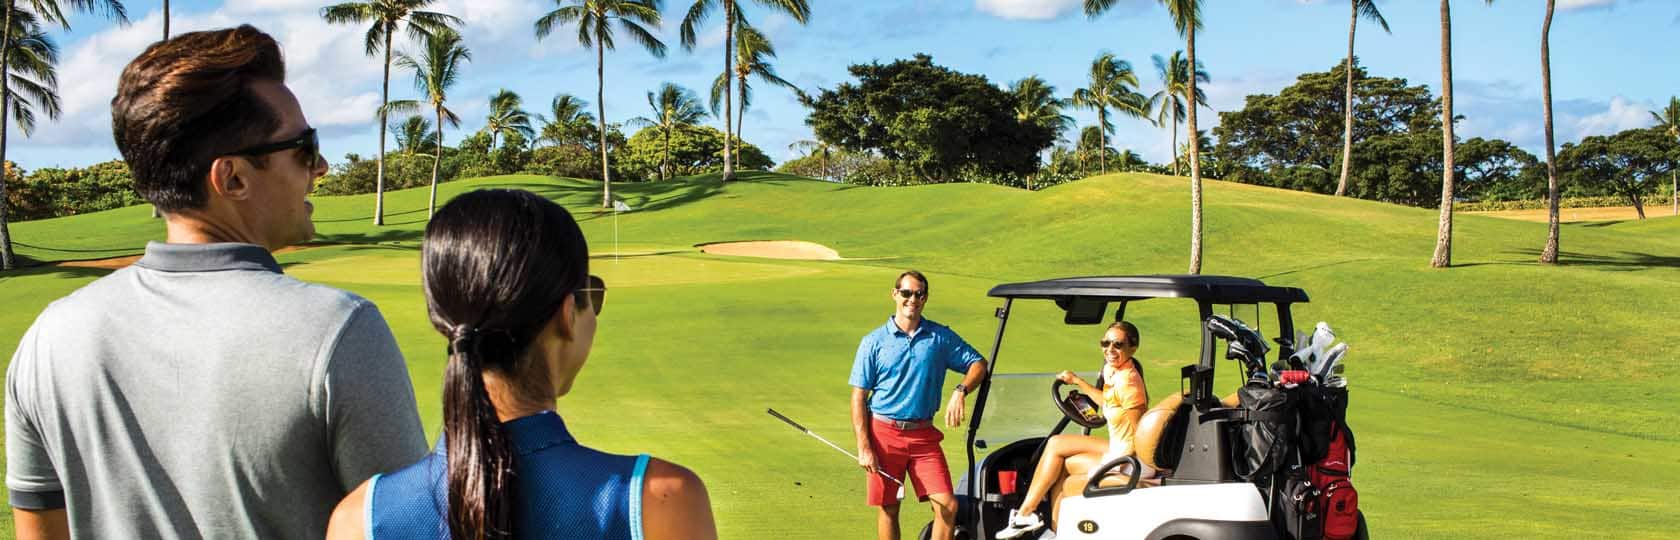 man and woman talking to man and woman on golf cart at golf course